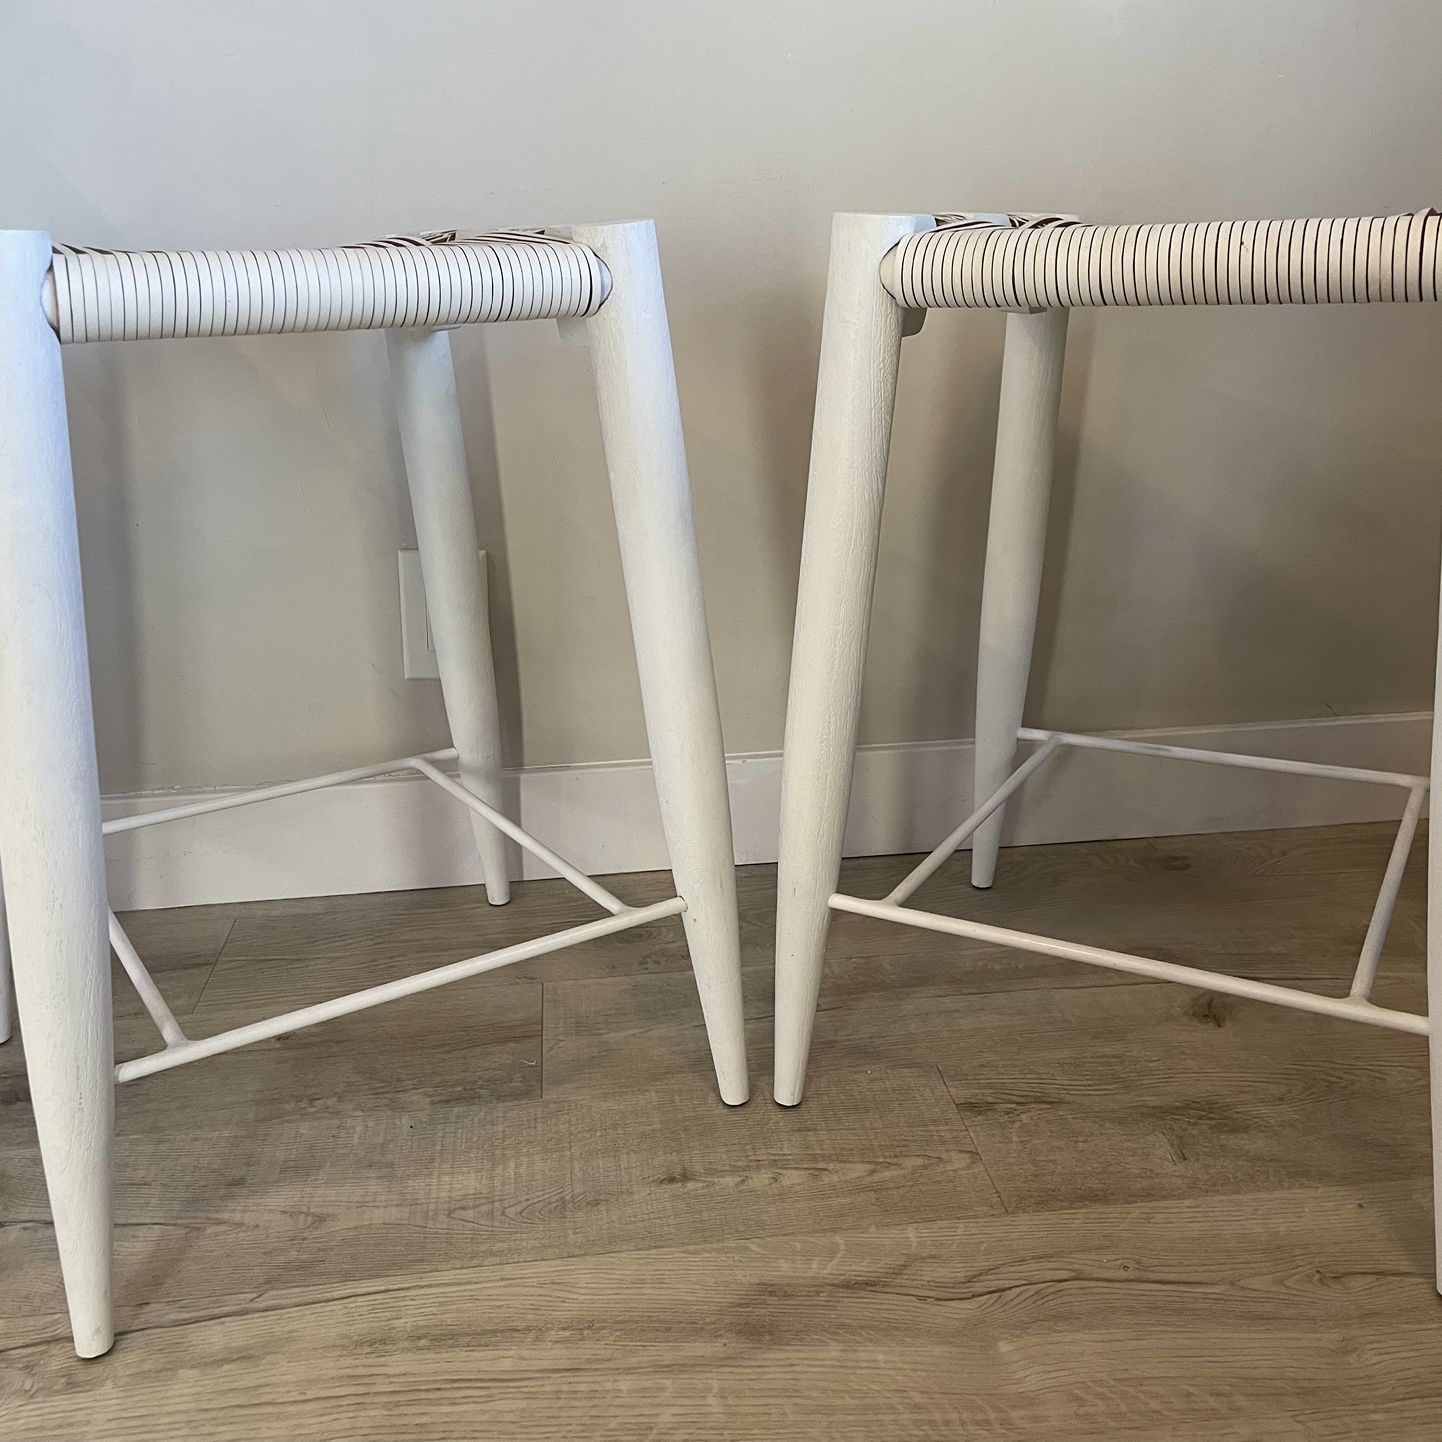 2 Counter Height Bar Stools From CB2- White